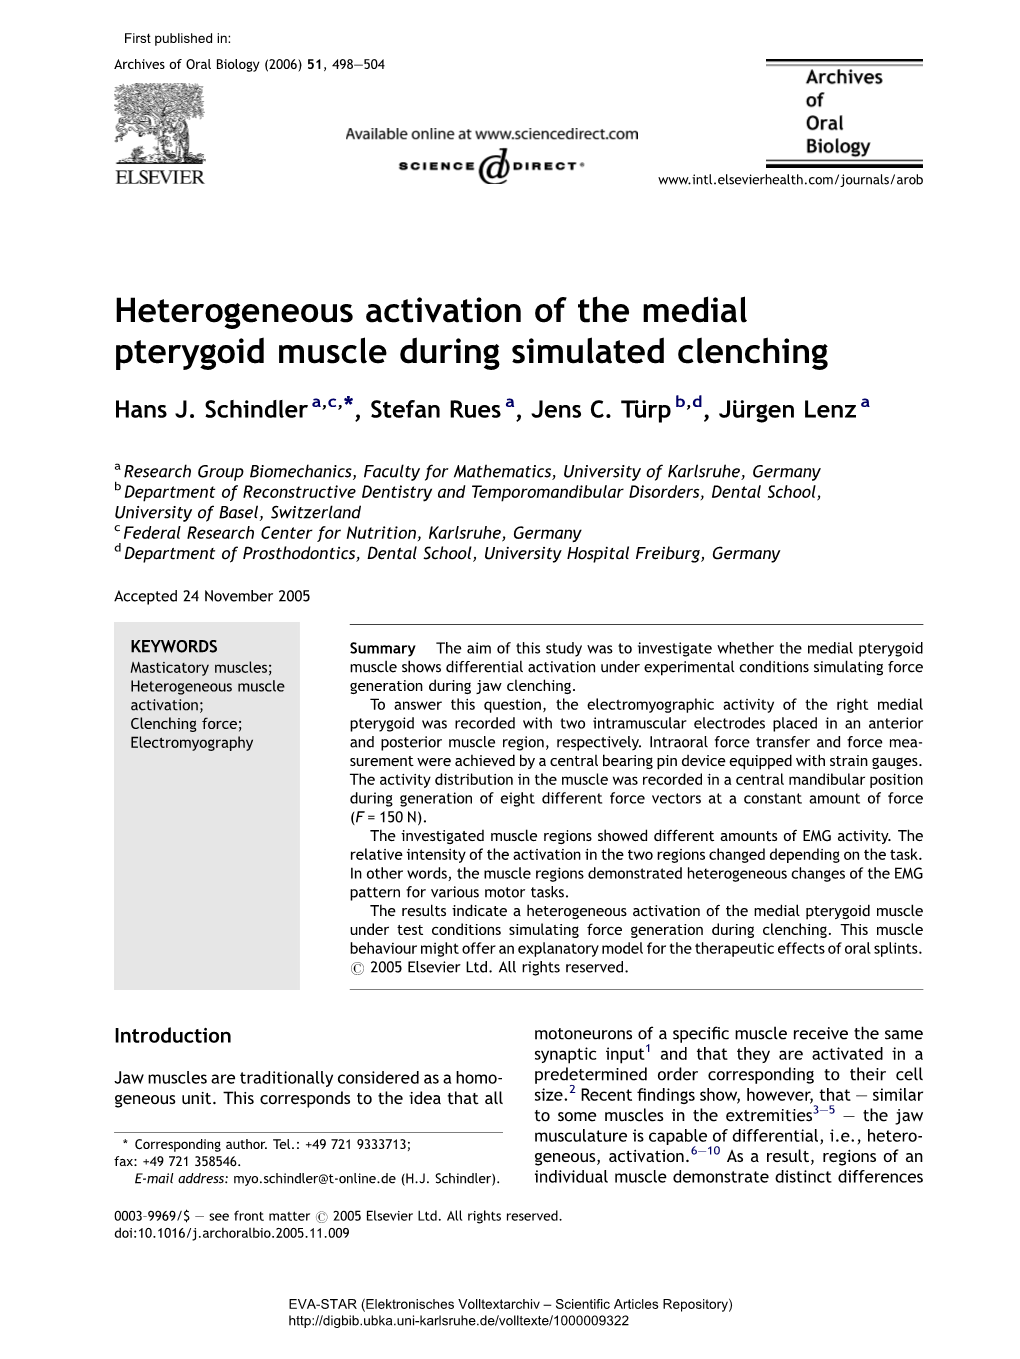 Heterogeneous Activation of the Medial Pterygoid Muscle During Simulated Clenching